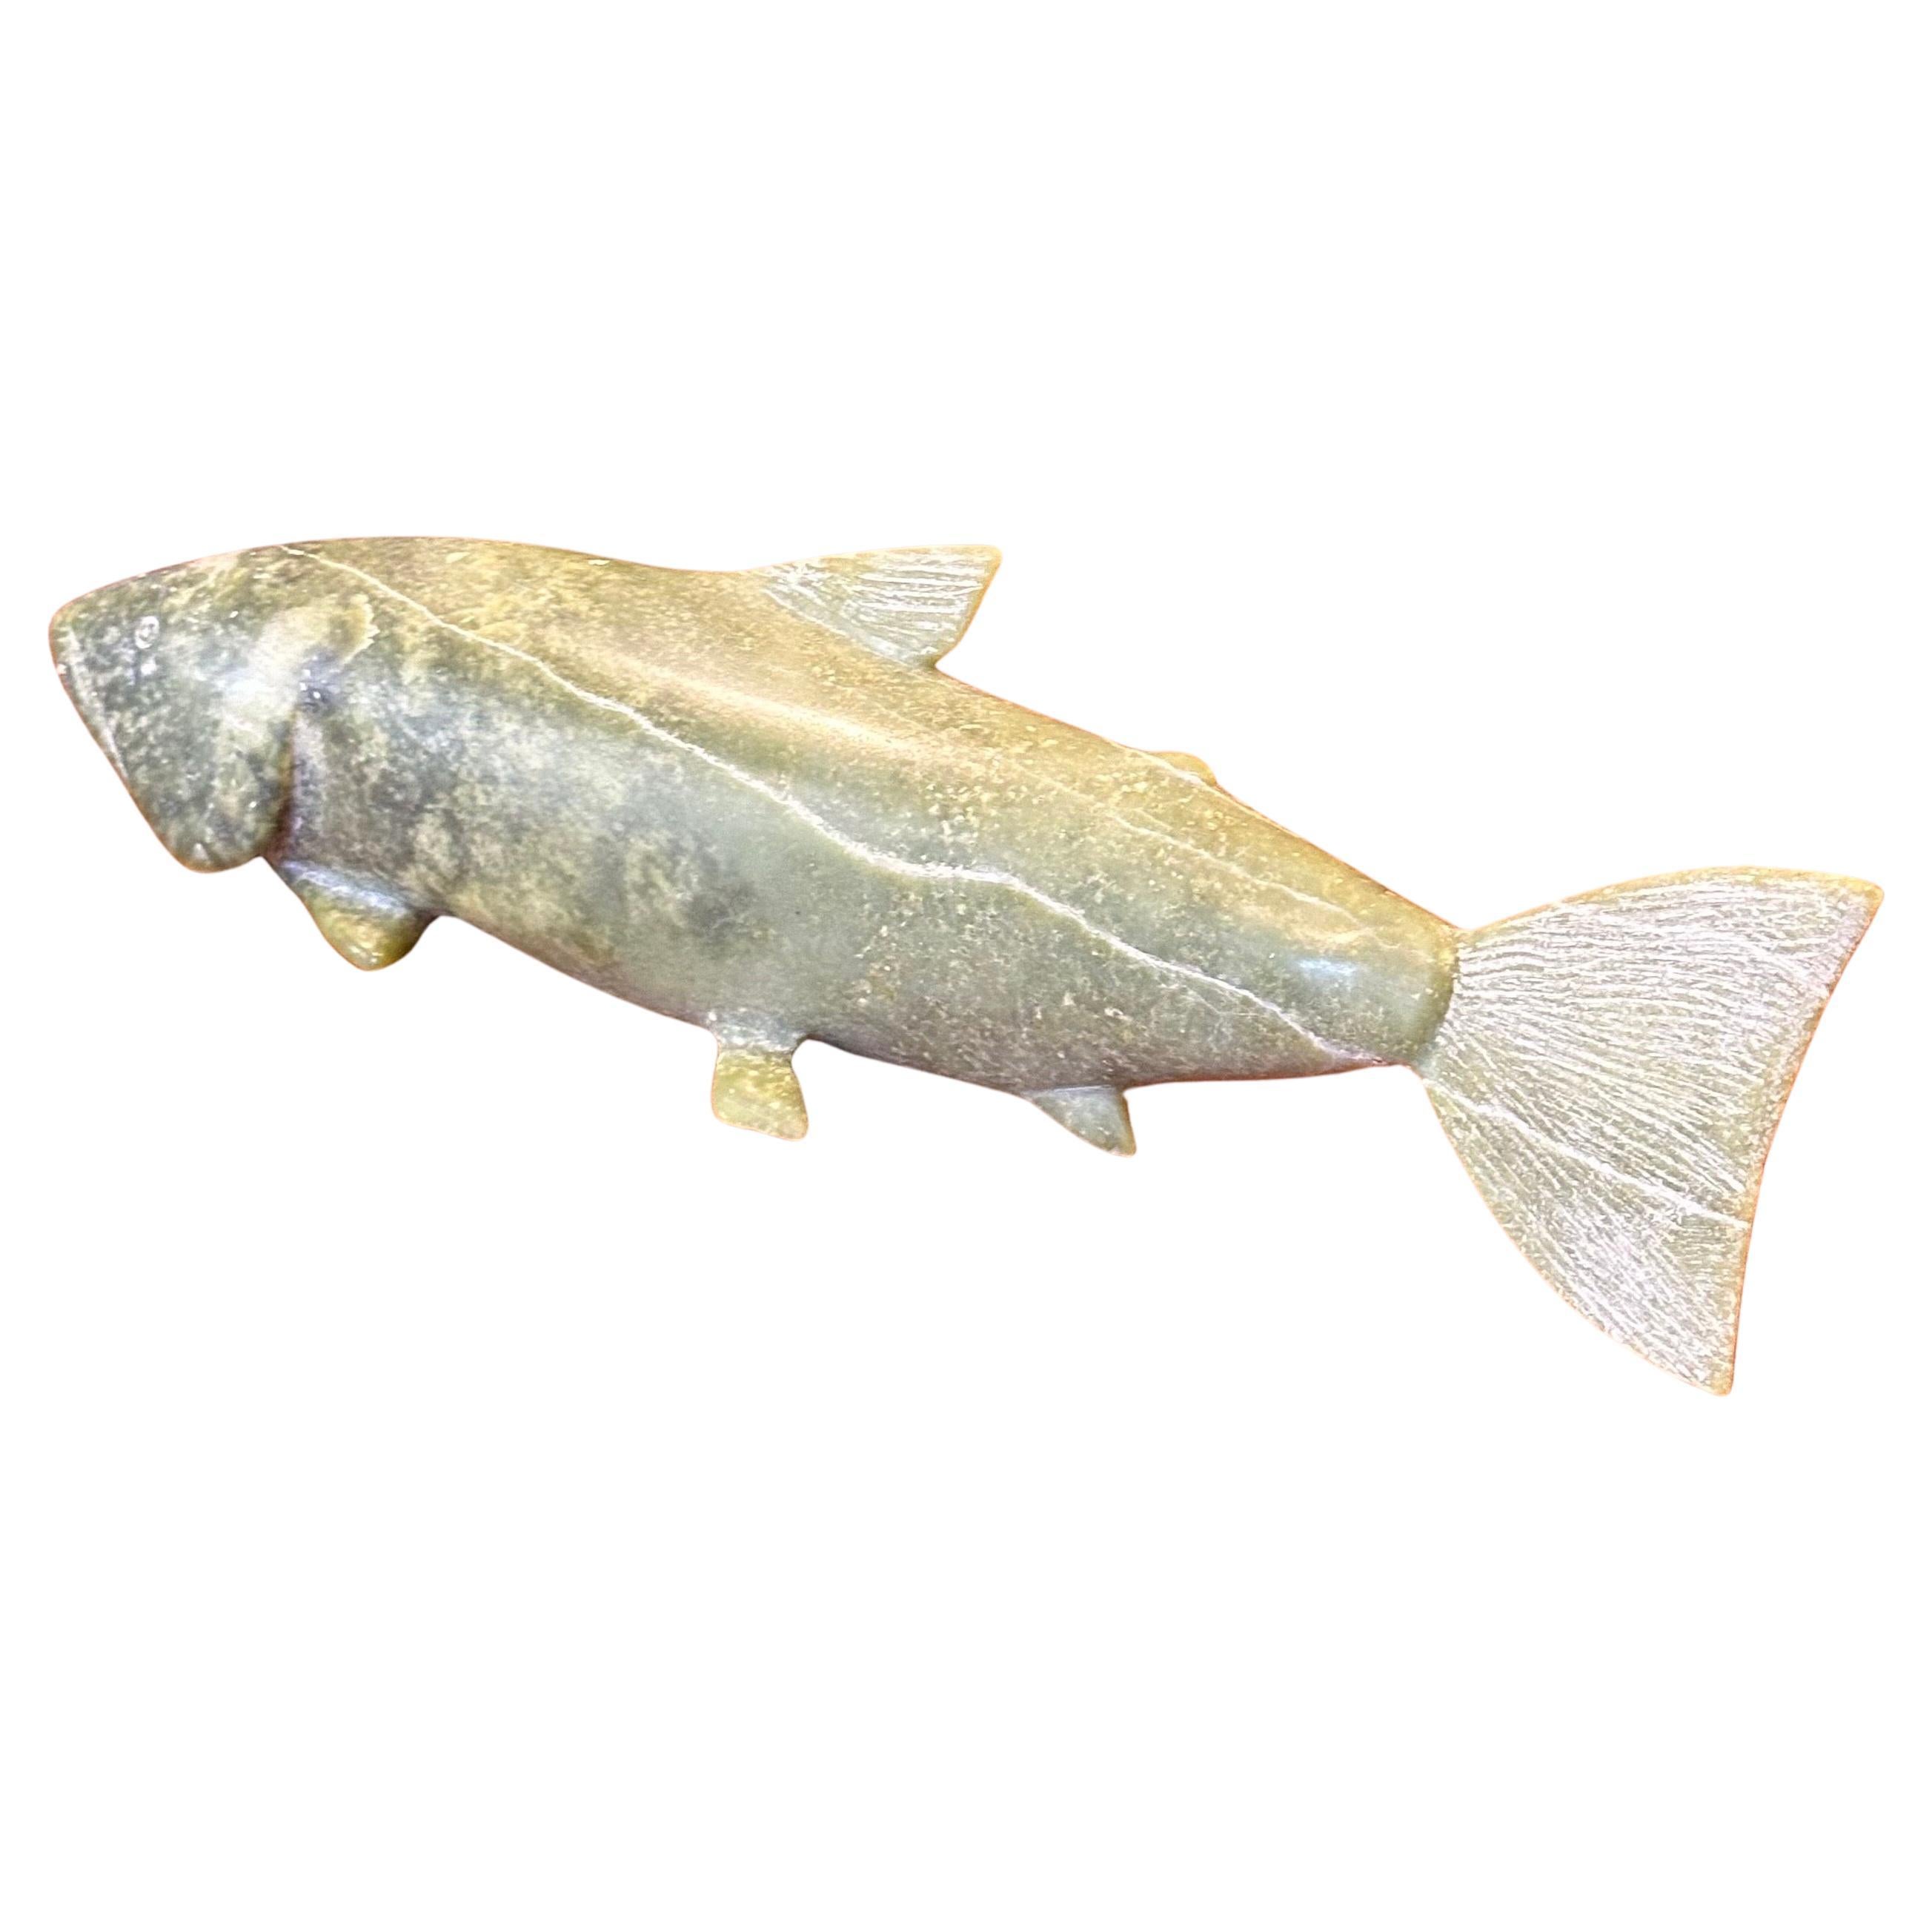 A well done hand carved soapstone salmon / fish sculpture, circa 1990s. The piece is in very good vintage condition with no chips or cracks and measures 13